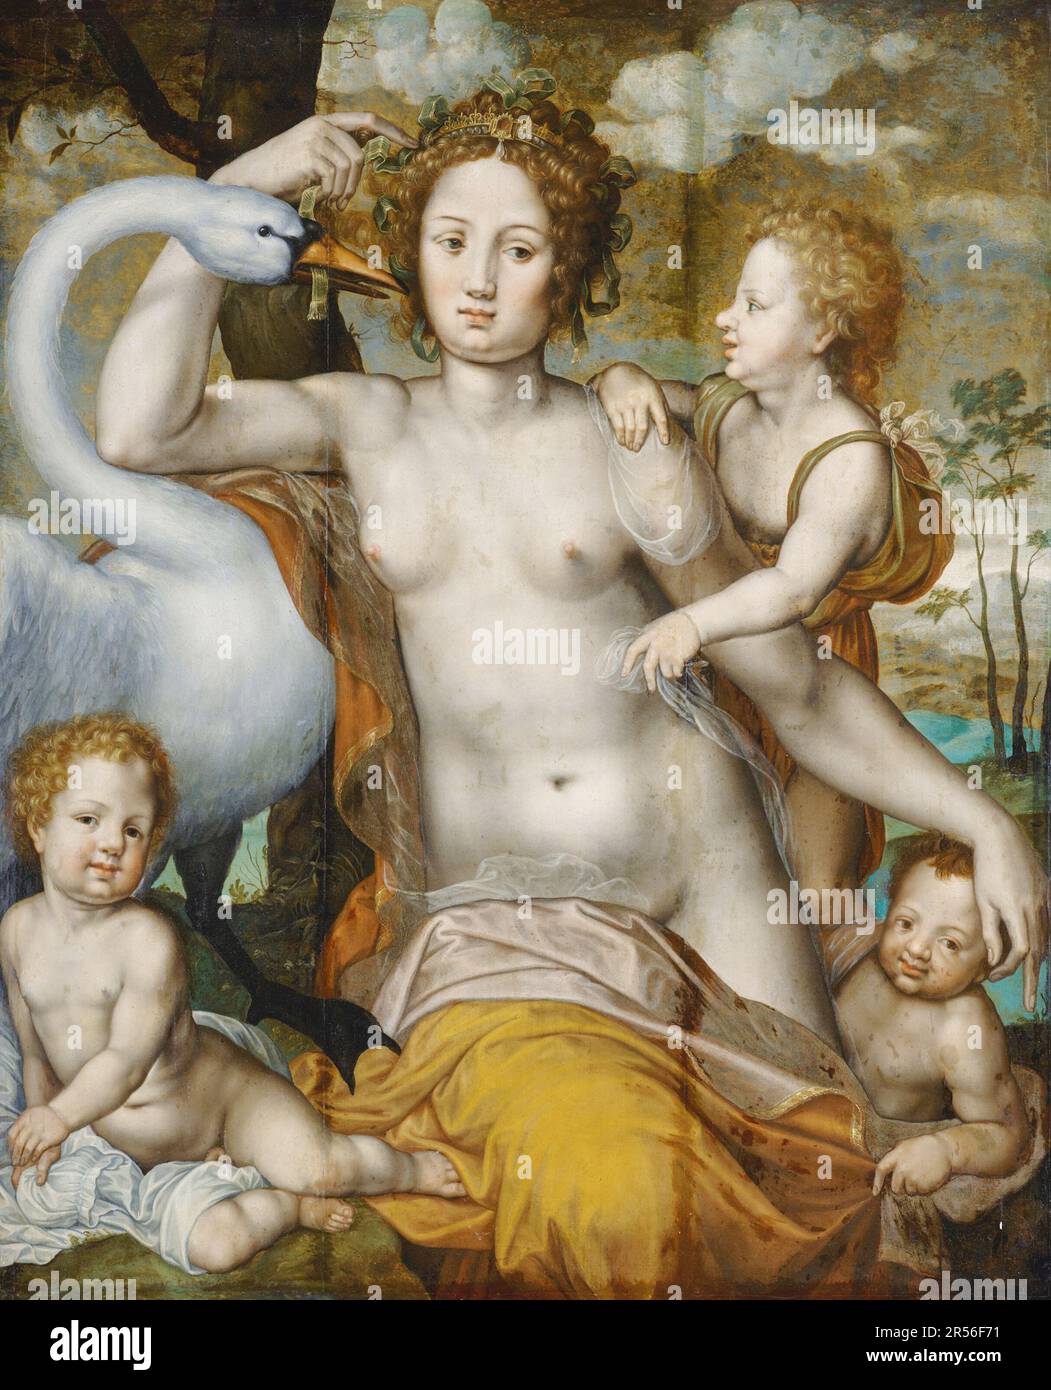 Vincent Sellaer - Leda and the Swan - 1500's Stock Photo